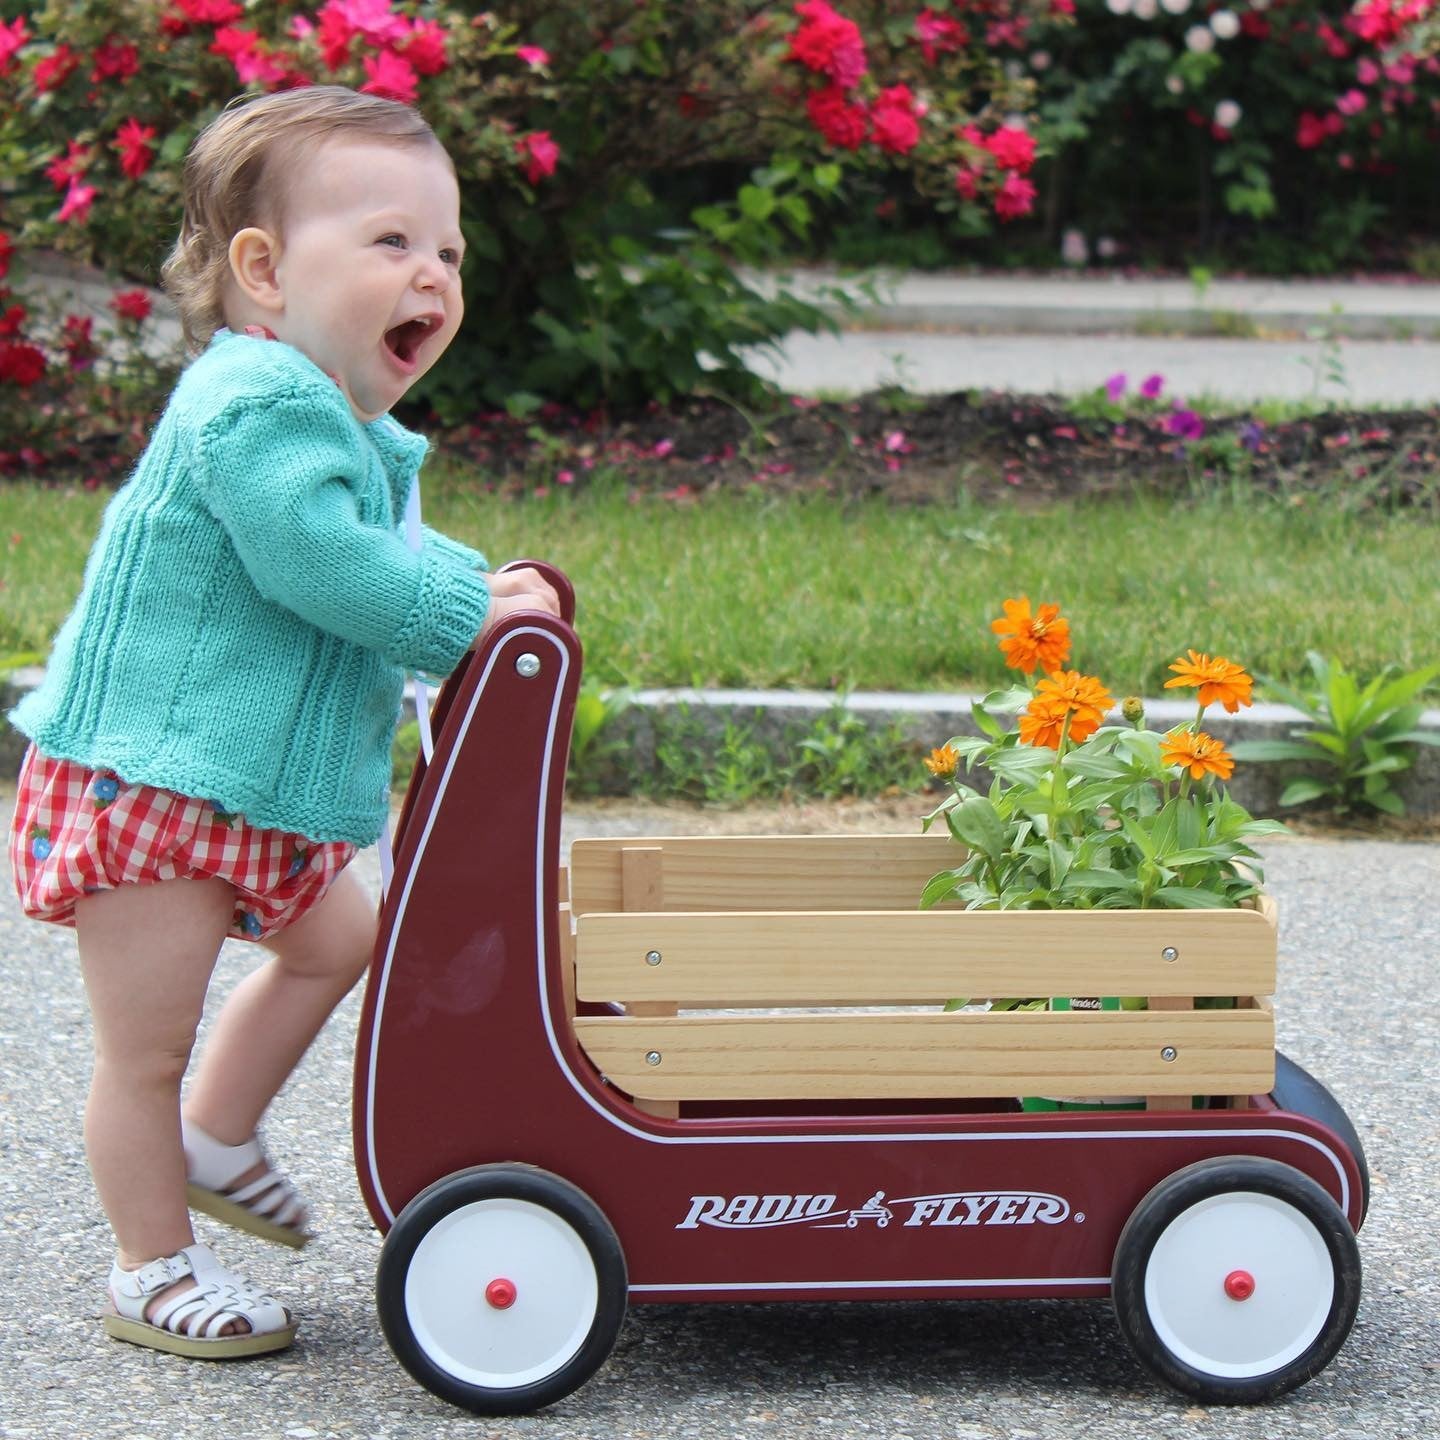 100 Ways to Use Your Wagon for Kids – Radio Flyer